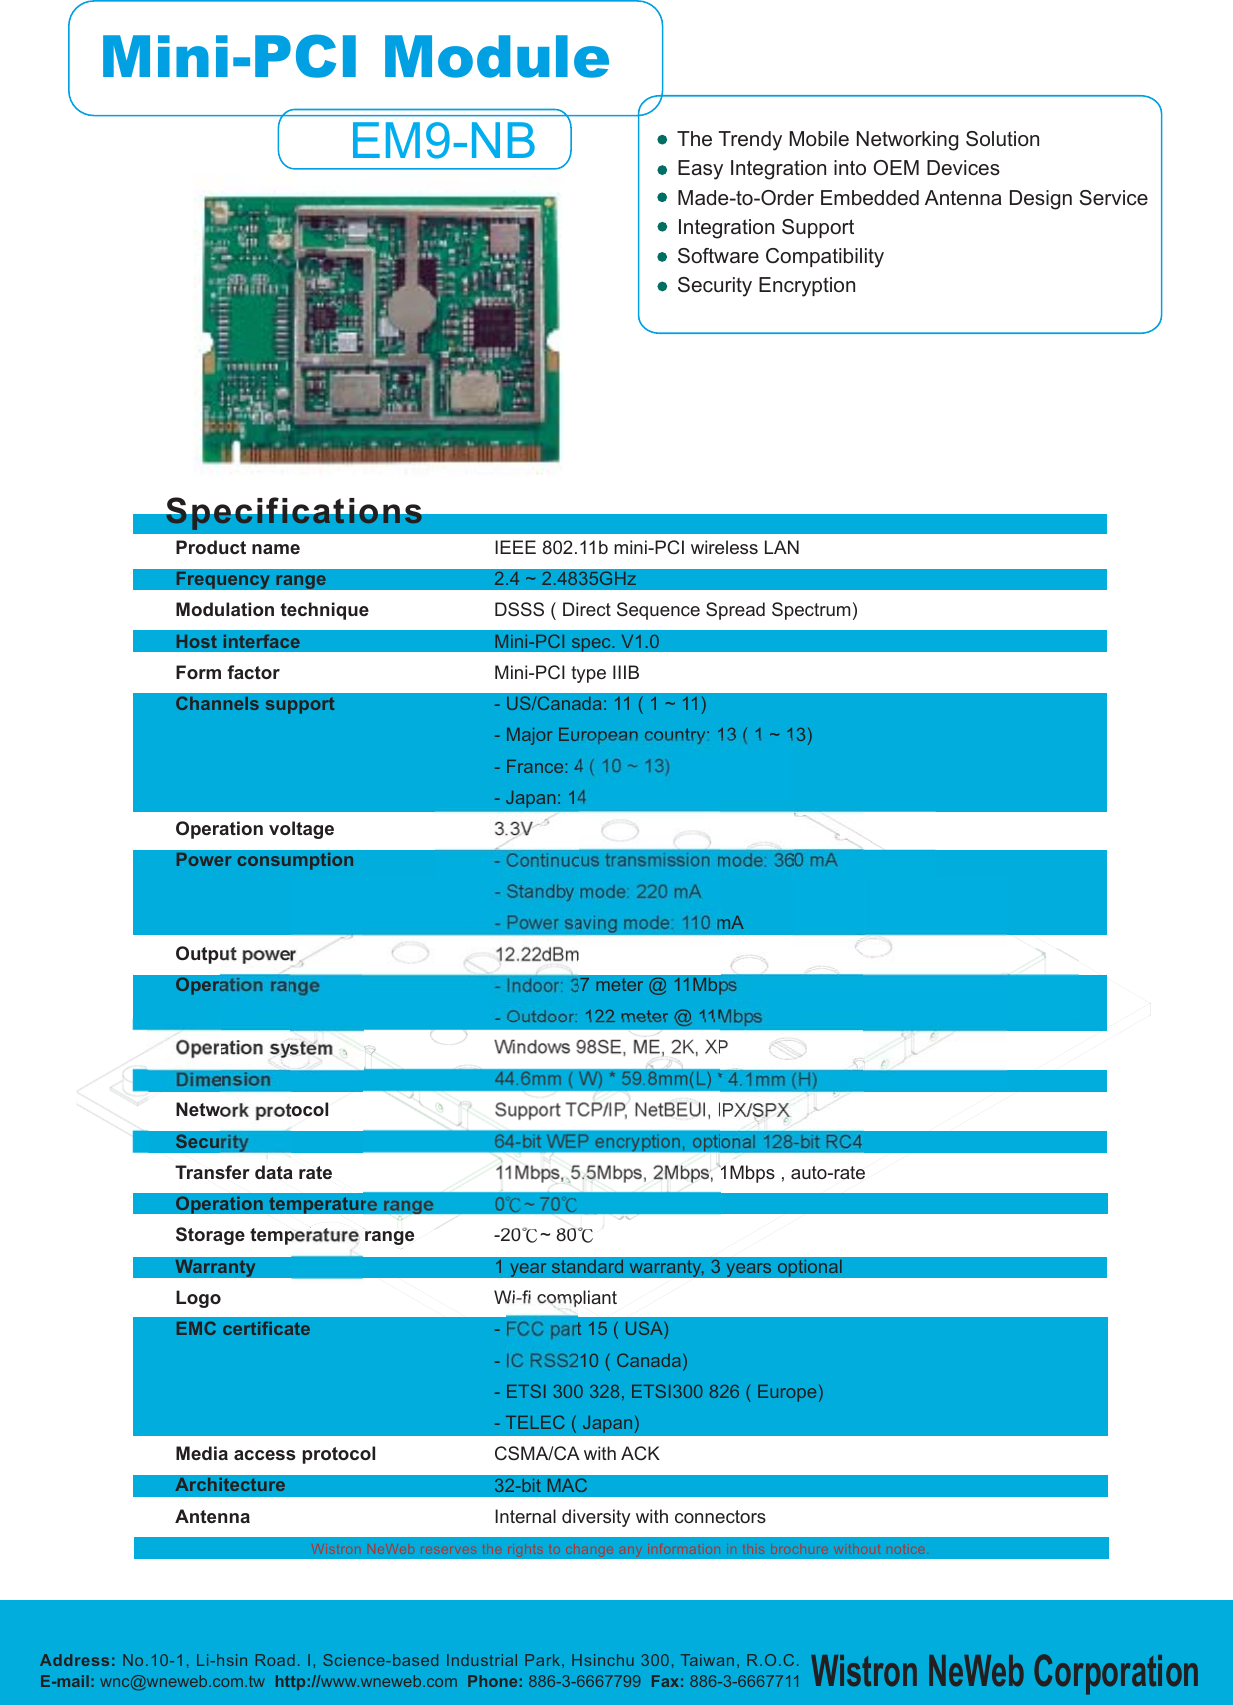 SpecificationsWistron NeWeb reserves the rights to change any information in this brochure without notice.Product nameFrequency rangeModulation techniqueHost interfaceForm factorChannels supportOperation voltagePower consumptionOutput powerOperation rangeOperation systemDimensionNetwork protocolSecurityTransfer data rateOperation temperature rangeStorage temperature rangeWarrantyLogoEMC certificateMedia access protocolArchitectureAntennaIEEE 802.11b mini-PCI wireless LAN2.4 ~ 2.4835GHzDSSS ( Direct Sequence Spread Spectrum)Mini-PCI spec. V1.0Mini-PCI type IIIB- US/Canada: 11 ( 1 ~ 11)- Major European country: 13 ( 1 ~ 13)- France: 4 ( 10 ~ 13)- Japan: 143.3V- Continuous transmission mode: 360 mA- Standby mode: 220 mA- Power saving mode: 110 mA12.22dBm- Indoor: 37 meter @ 11Mbps- Outdoor: 122 meter @ 11MbpsWindows 98SE, ME, 2K, XP44.6mm ( W) * 59.8mm(L) * 4.1mm (H)Support TCP/IP, NetBEUI, IPX/SPX64-bit WEP encryption, optional 128-bit RC411Mbps, 5.5Mbps, 2Mbps, 1Mbps , auto-rate0ʨ~70ʨ-20ʨ~80ʨ1 year standard warranty, 3 years optionalWi-fi compliant- FCC part 15 ( USA)- IC RSS210 ( Canada)- ETSI 300 328, ETSI300 826 ( Europe)- TELEC ( Japan)CSMA/CA with ACK32-bit MACInternal diversity with connectorsAddress: No.10-1, Li-hsin Road. I, Science-based Industrial Park, Hsinchu 300, Taiwan, R.O.C.E-mail: wnc@wneweb.com.tw http://www.wneweb.com Phone: 886-3-6667799 Fax: 886-3-6667711Wistron NeWeb CorporationThe Trendy Mobile Networking SolutionEasy Integration into OEM DevicesMade-to-Order Embedded Antenna Design ServiceIntegration SupportSoftware CompatibilitySecurity EncryptionMini-PCI ModuleEM9-NB